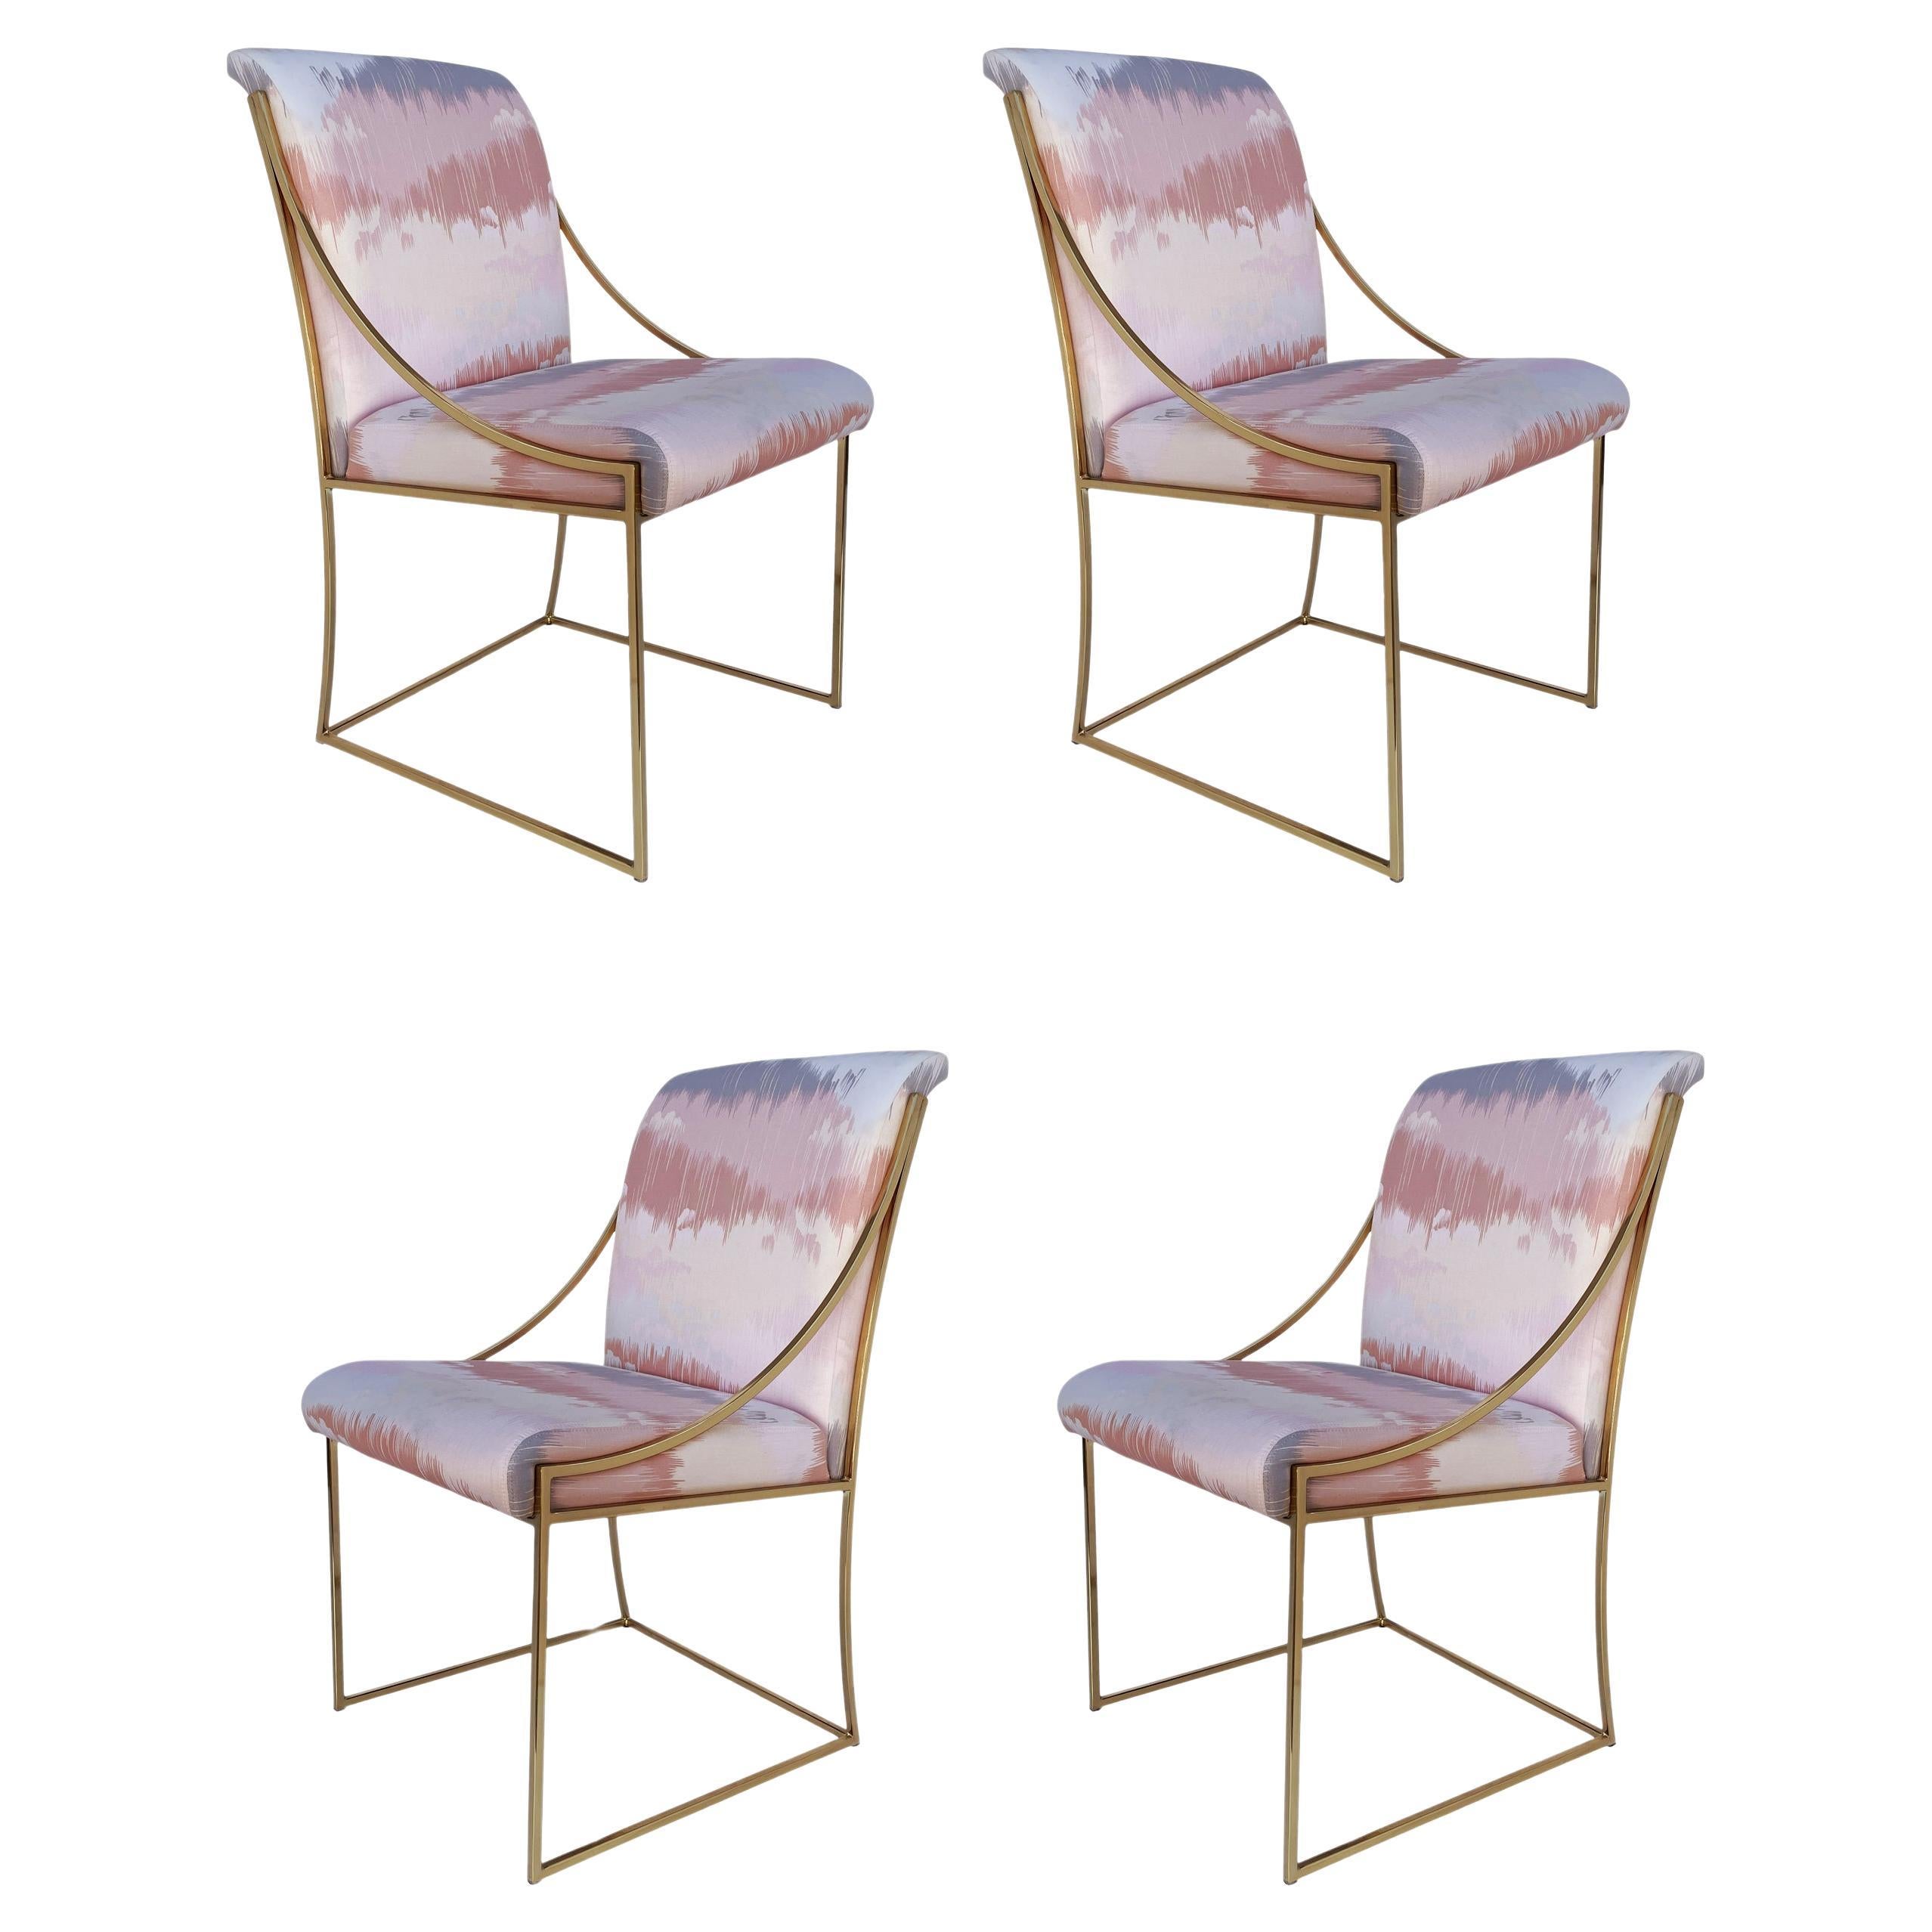 Four Mid Century Italian Post Modern Brass Frame Dining Chairs after Mastercraft For Sale